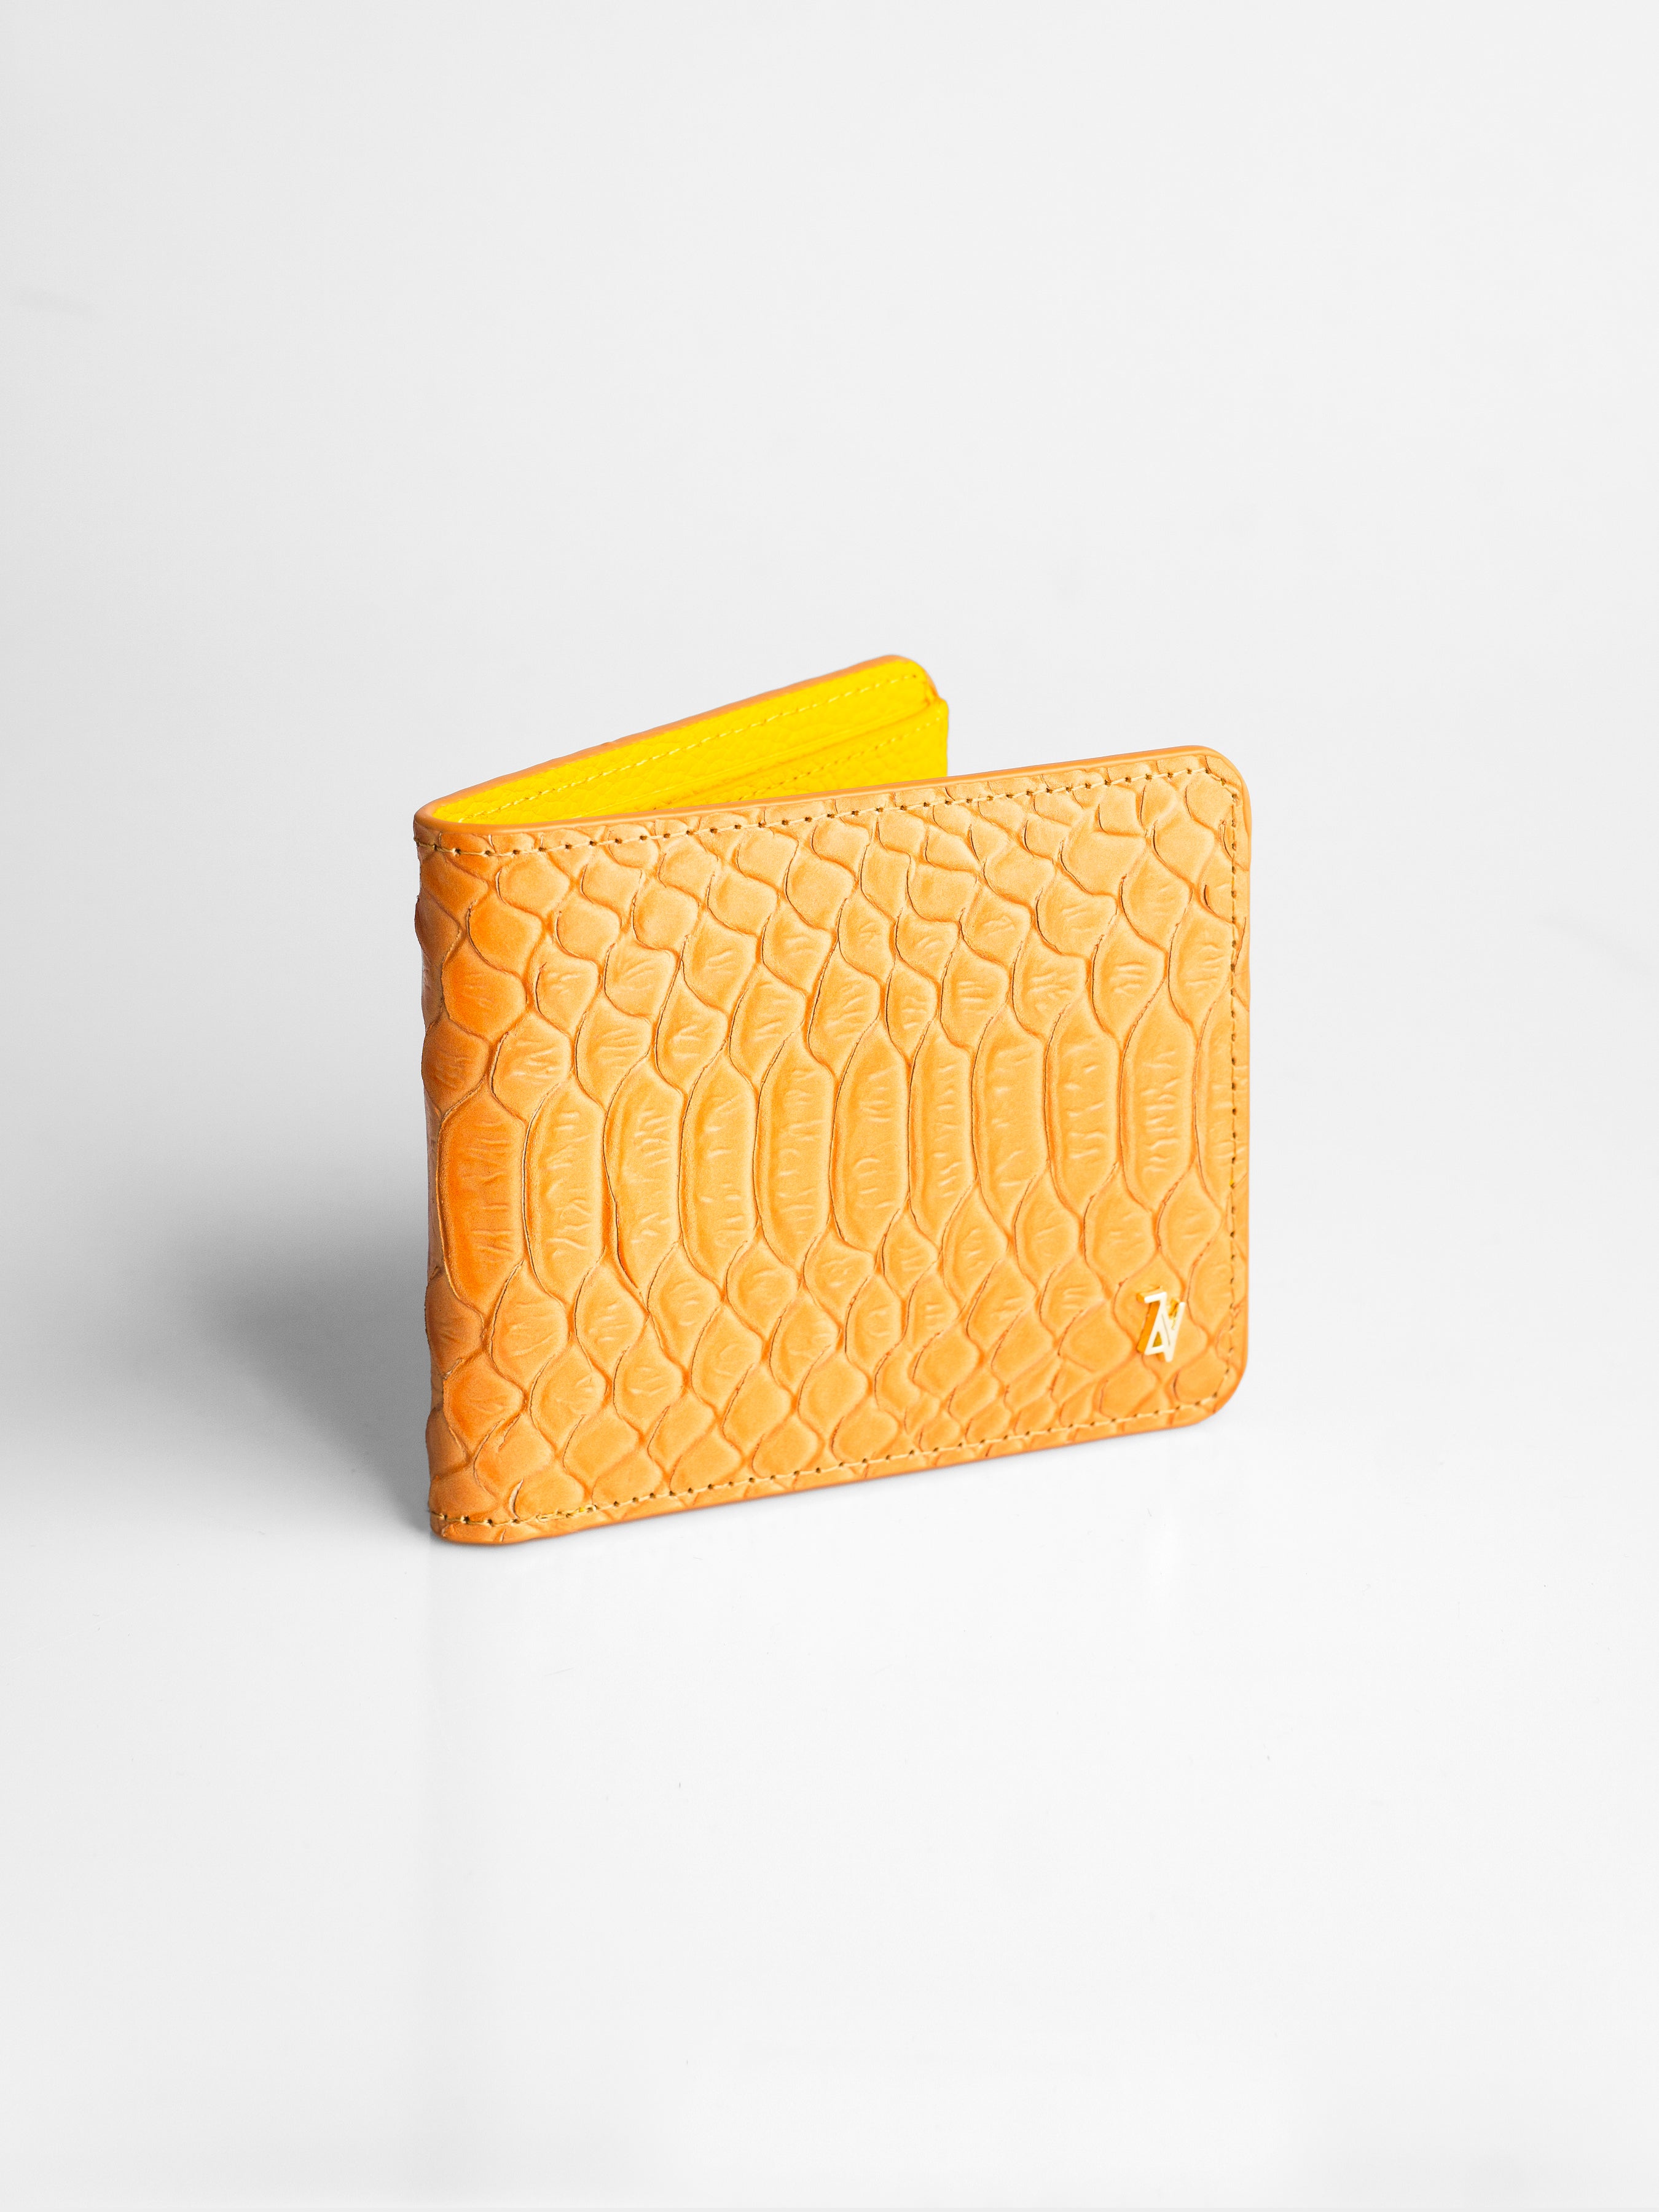 Artemis Python Wallet - Light Brown and Yellow Leather